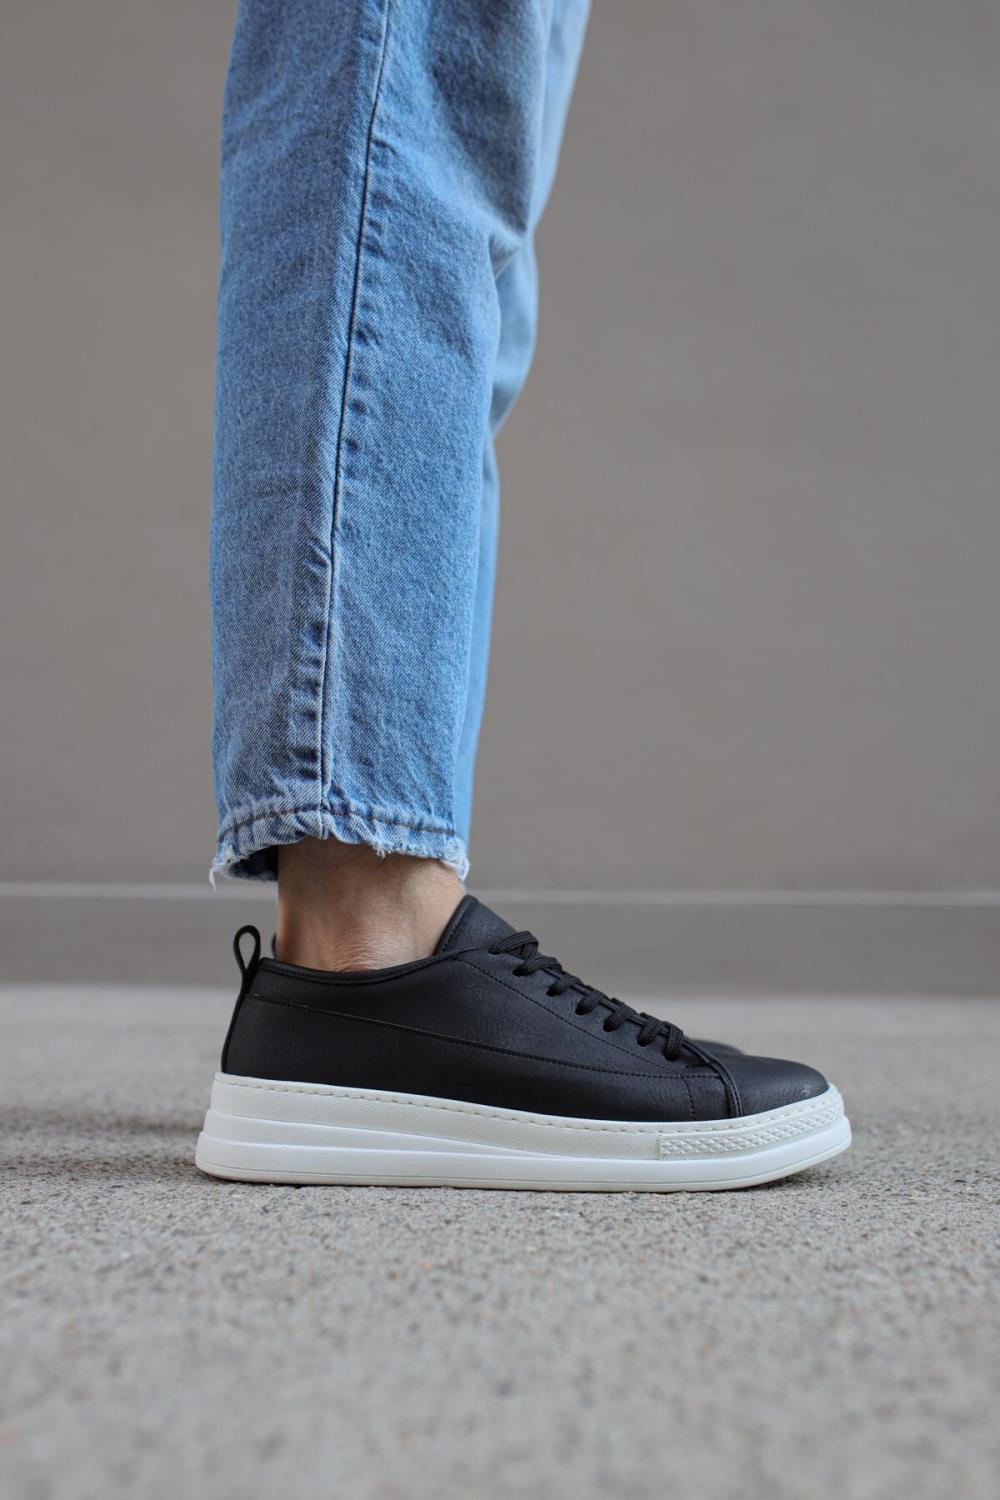 Knack Sneakers Shoes 010 Black (White Sole) - STREETMODE™